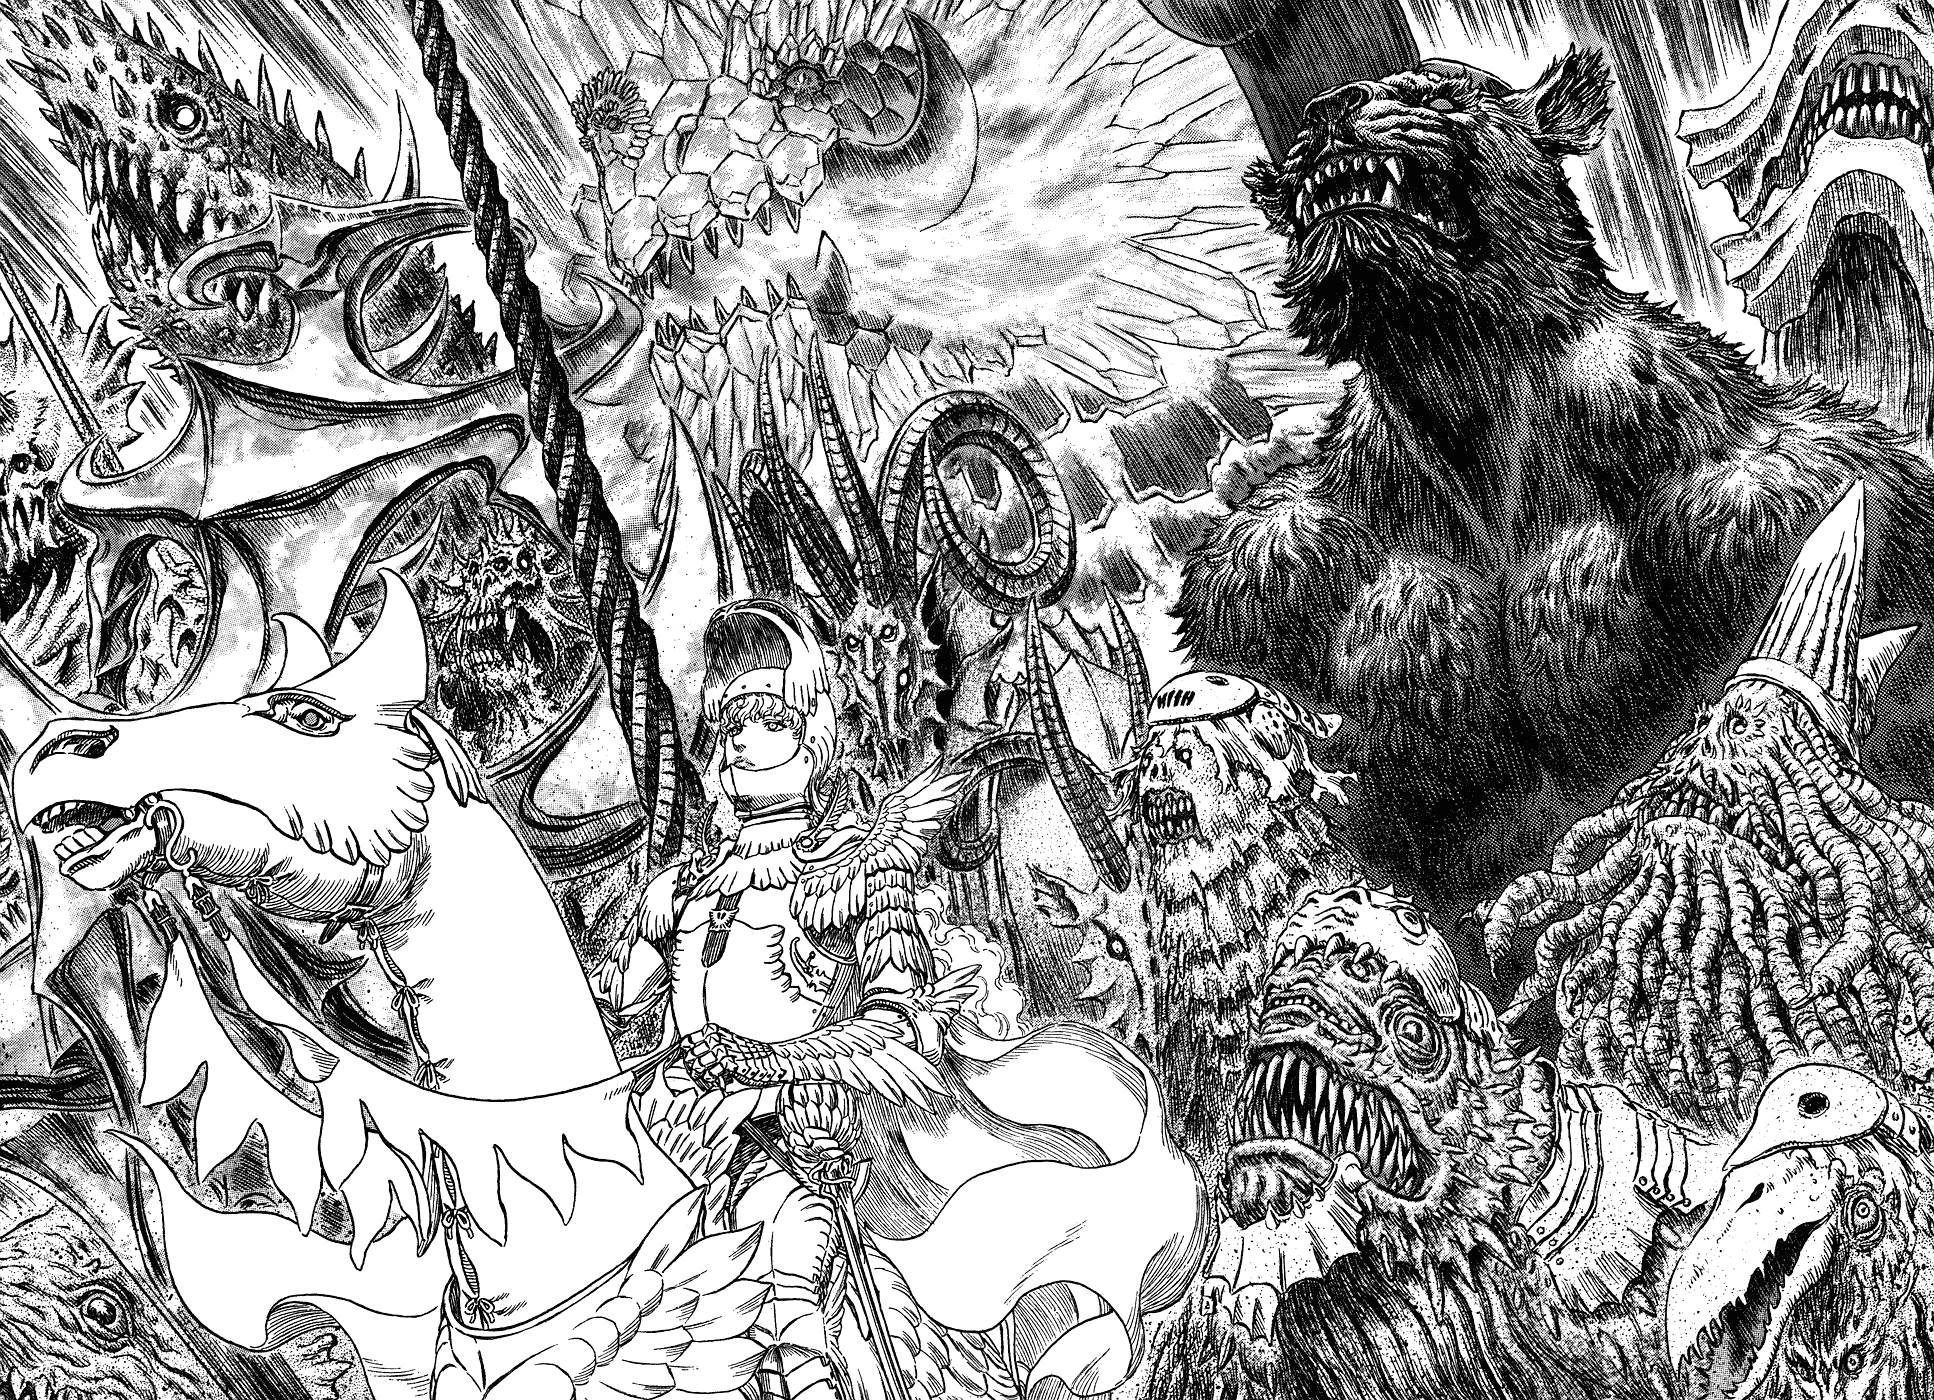 Berserk And The Nature Of Life - Gaming and God